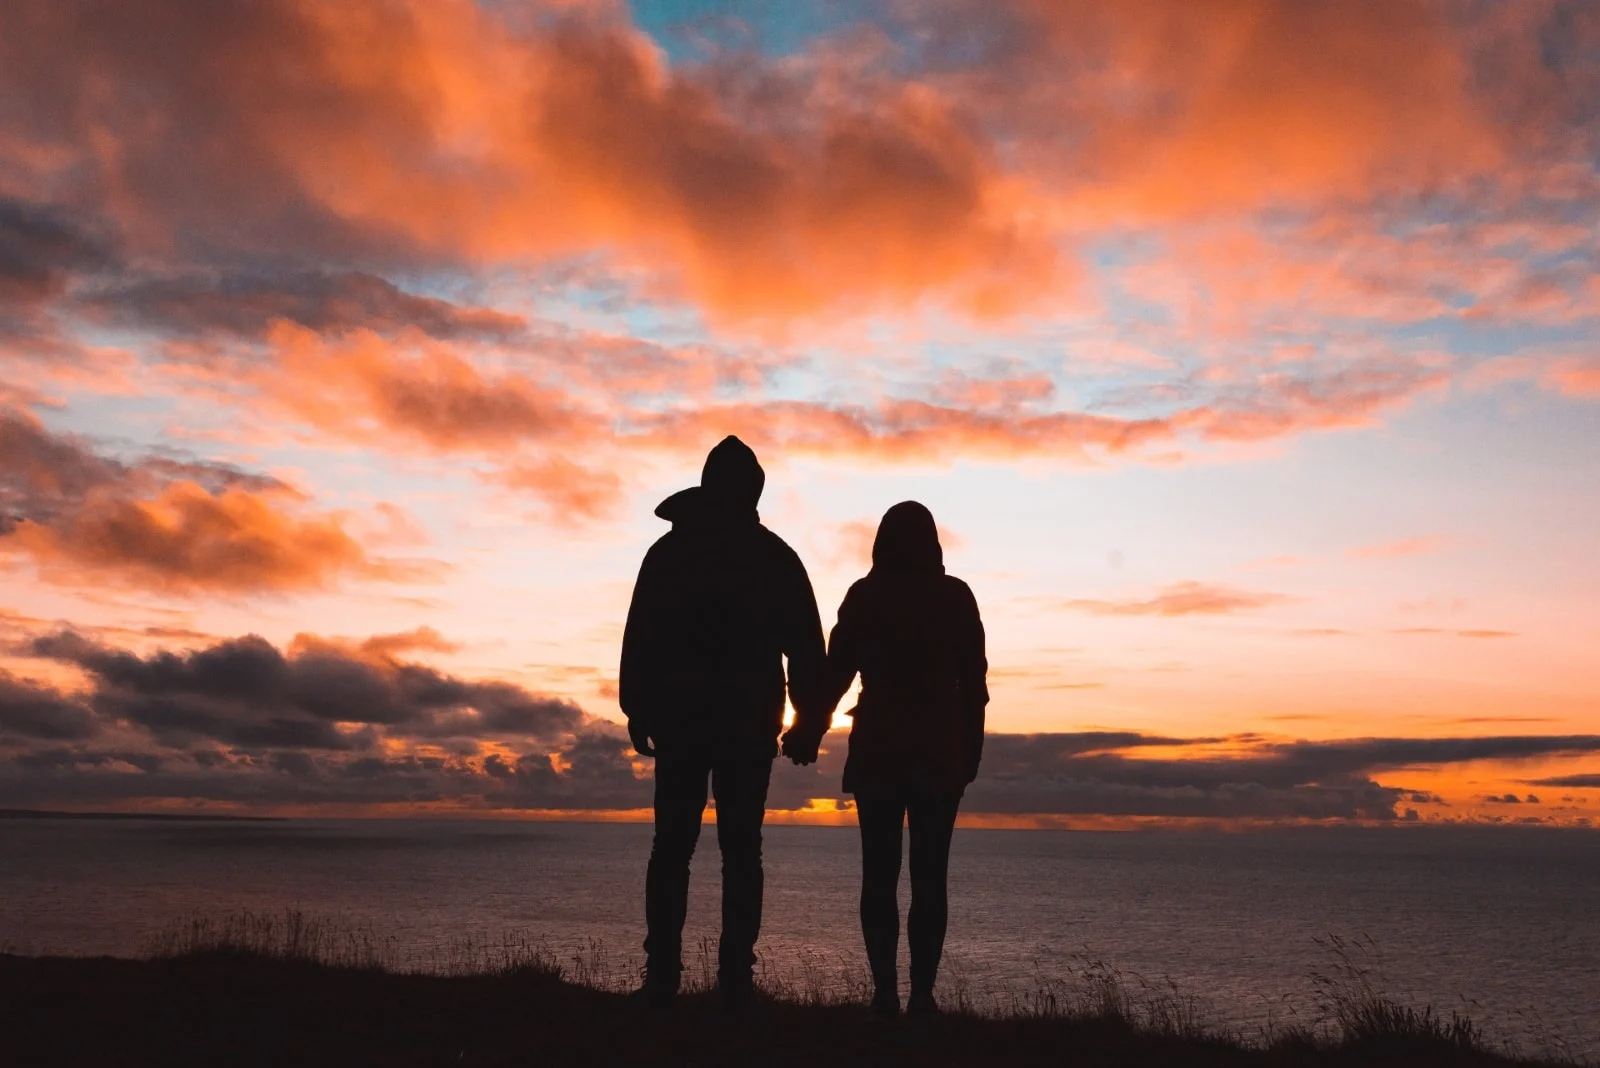 man and woman holding hands while looking at sea